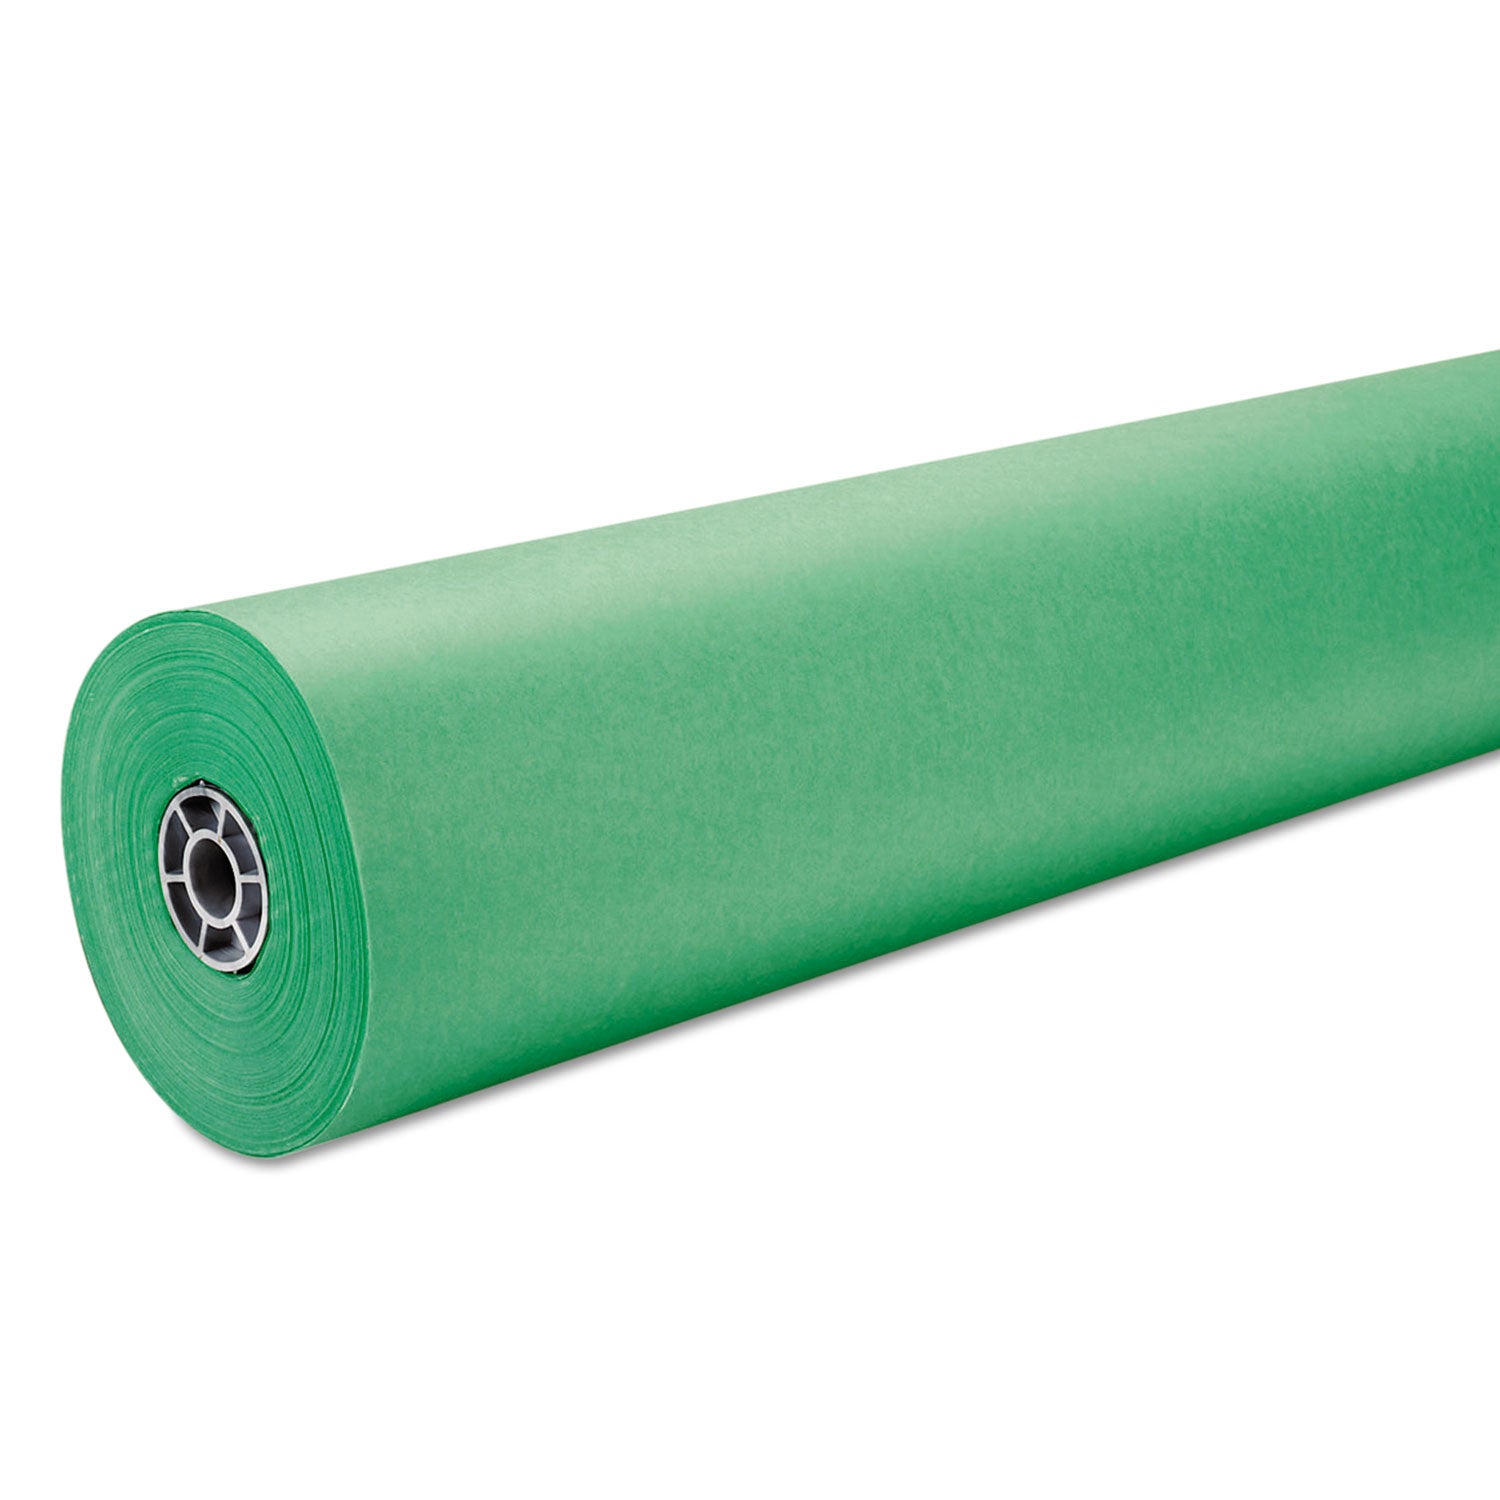 Rainbow Duo-Finish Colored Kraft Paper, 35 lb Wrapping Weight, 36" x 1,000 ft, Brite Green - 